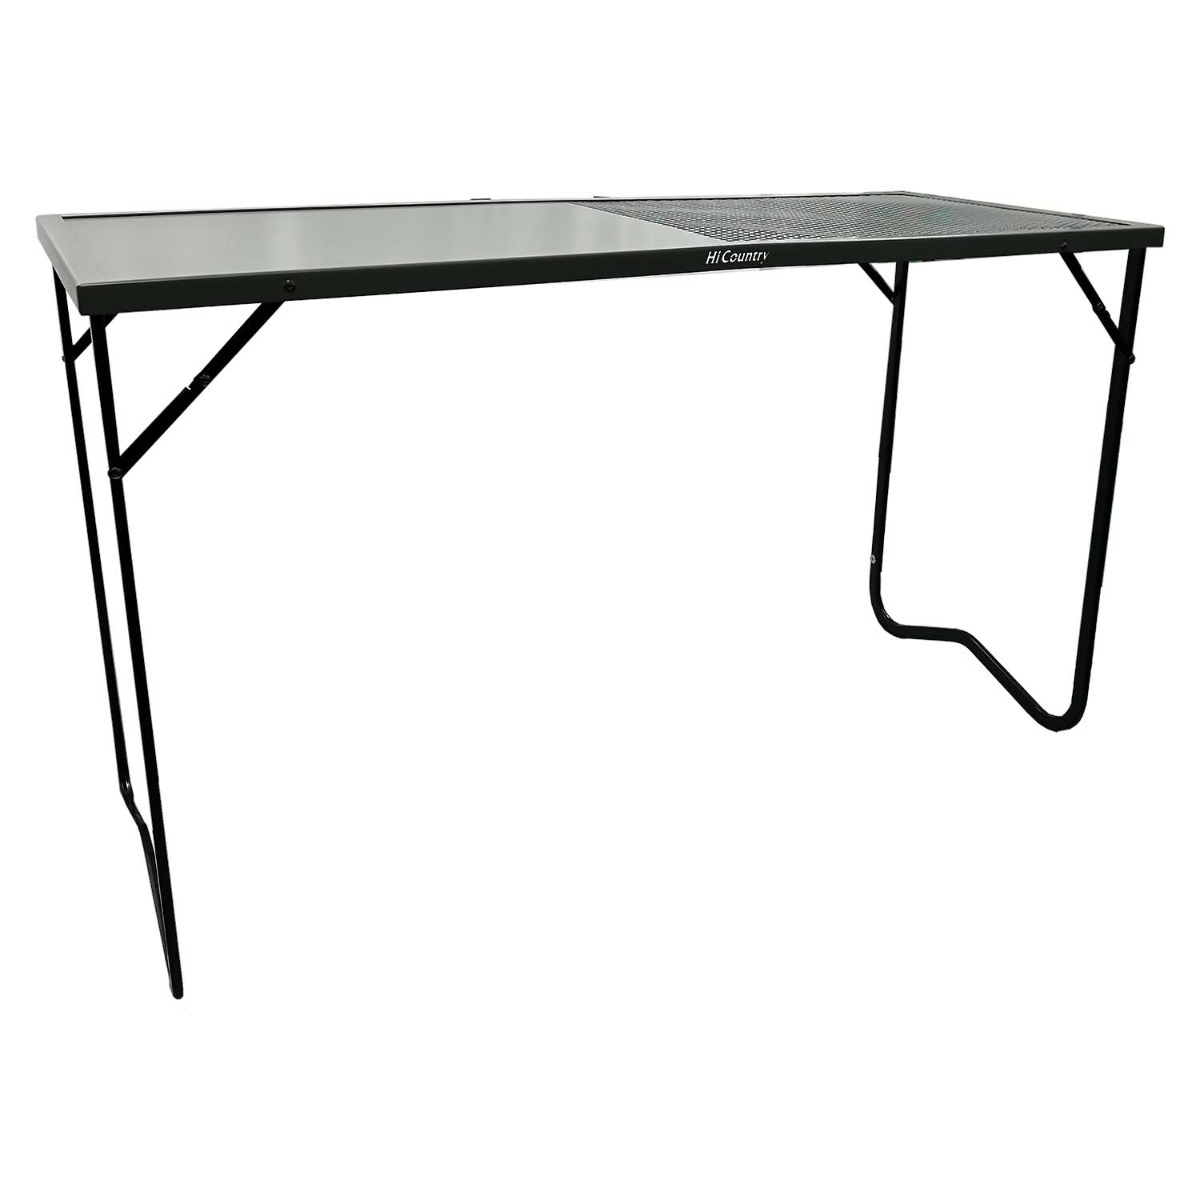 HI-COUNTRY RUGGED EXTREME TABLE LARGE